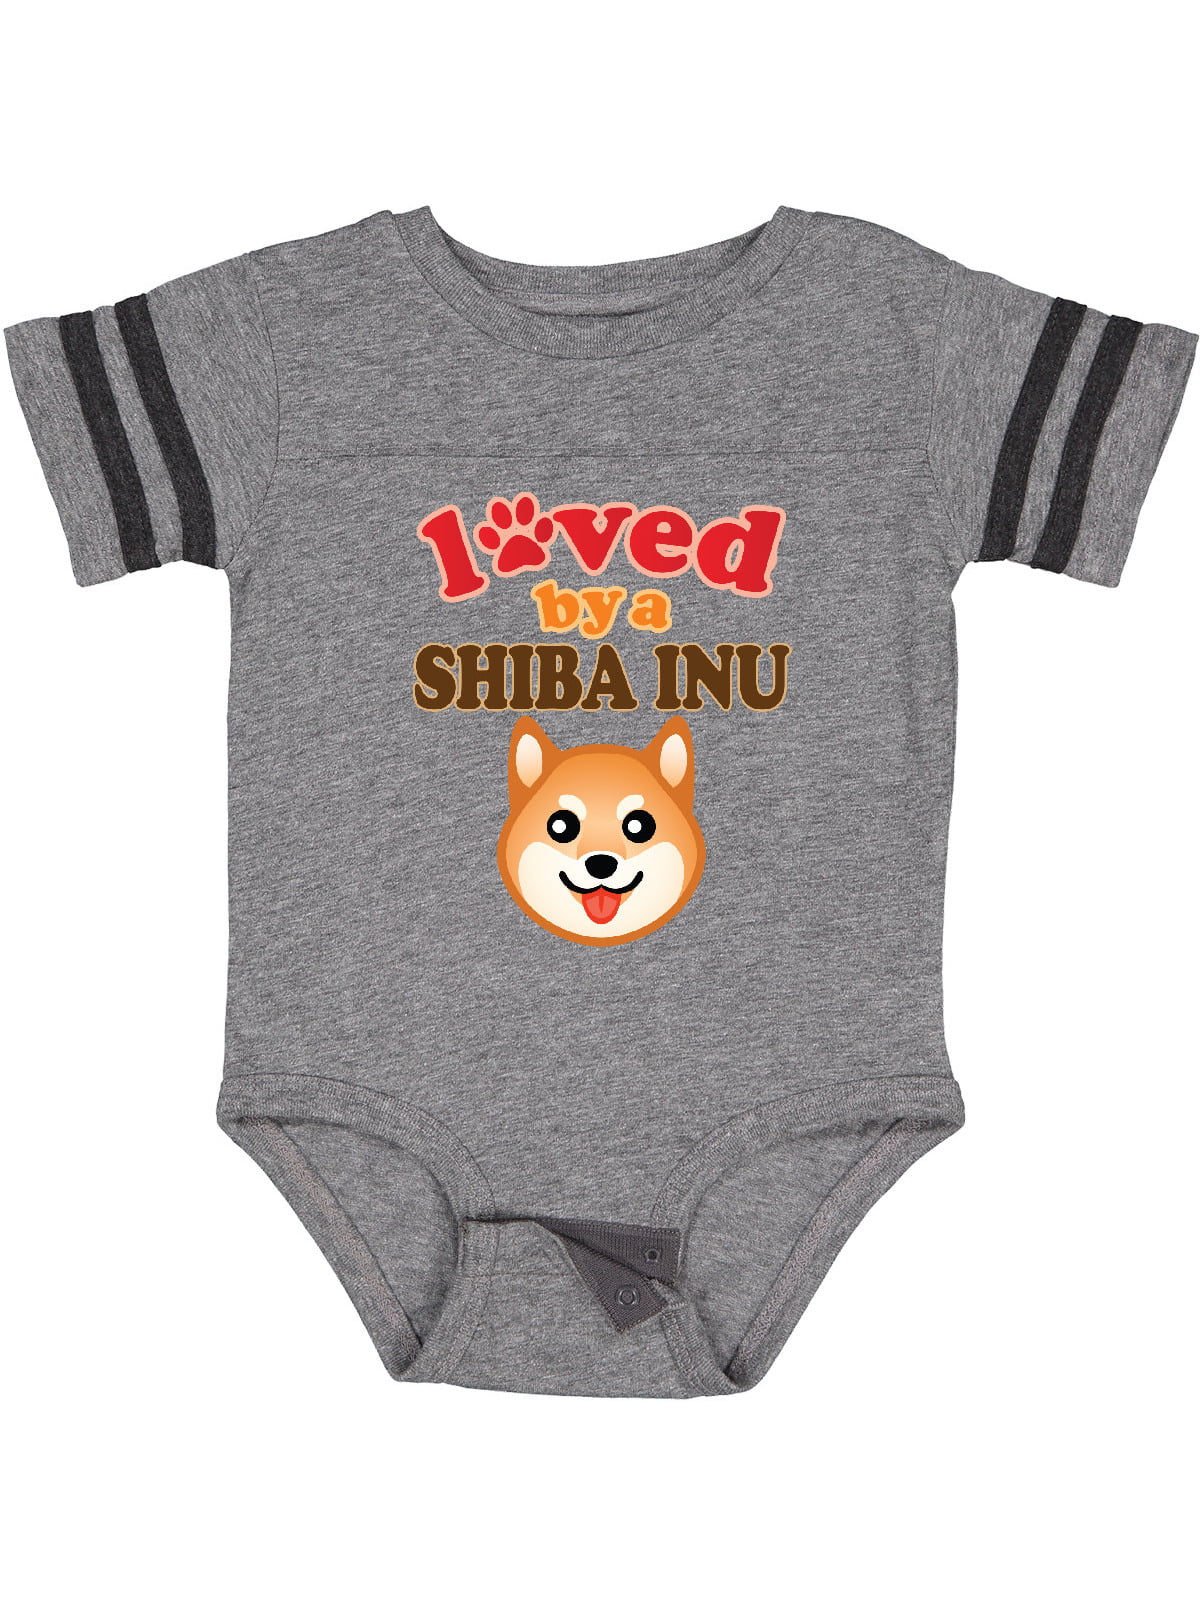 Shiba Inu Dog Unisex Baby Onesie Cartoon Newborn Clothes Funny Baby Outfits Comfortable Baby Clothes